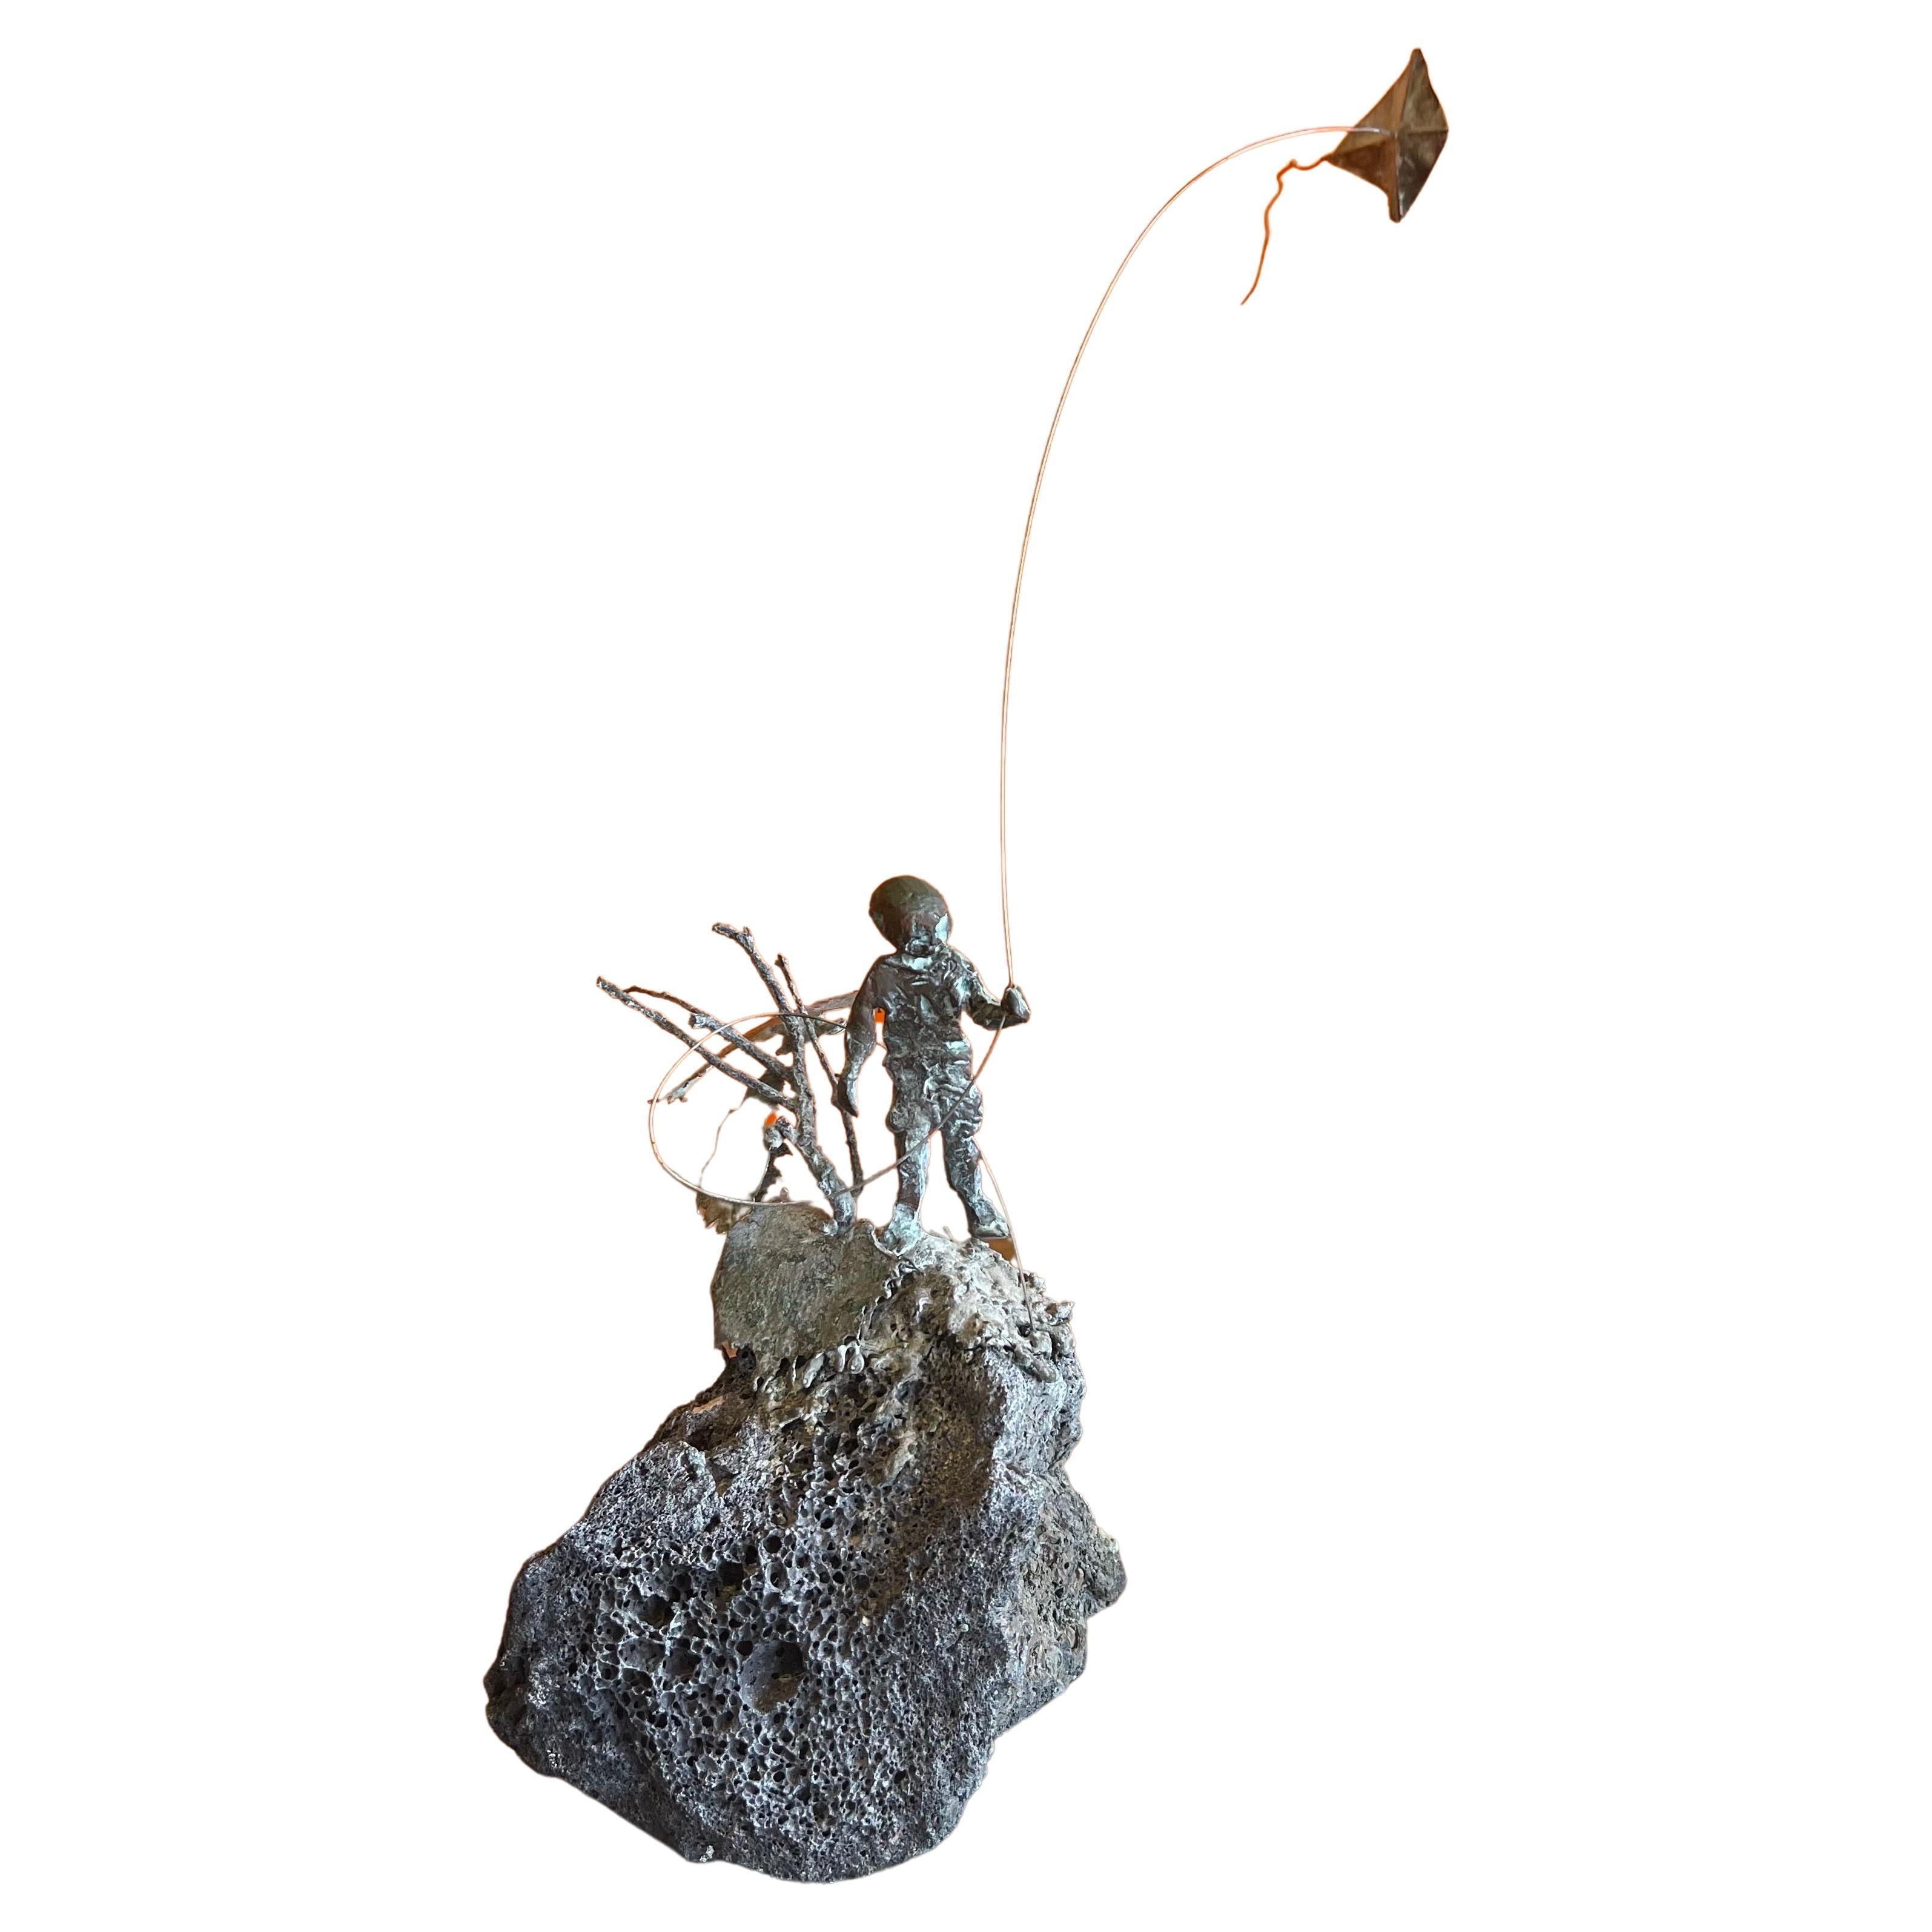 Child Flying Kite Bronze on Volcanic Rock Sculpture by Malcolm Moran For Sale 7